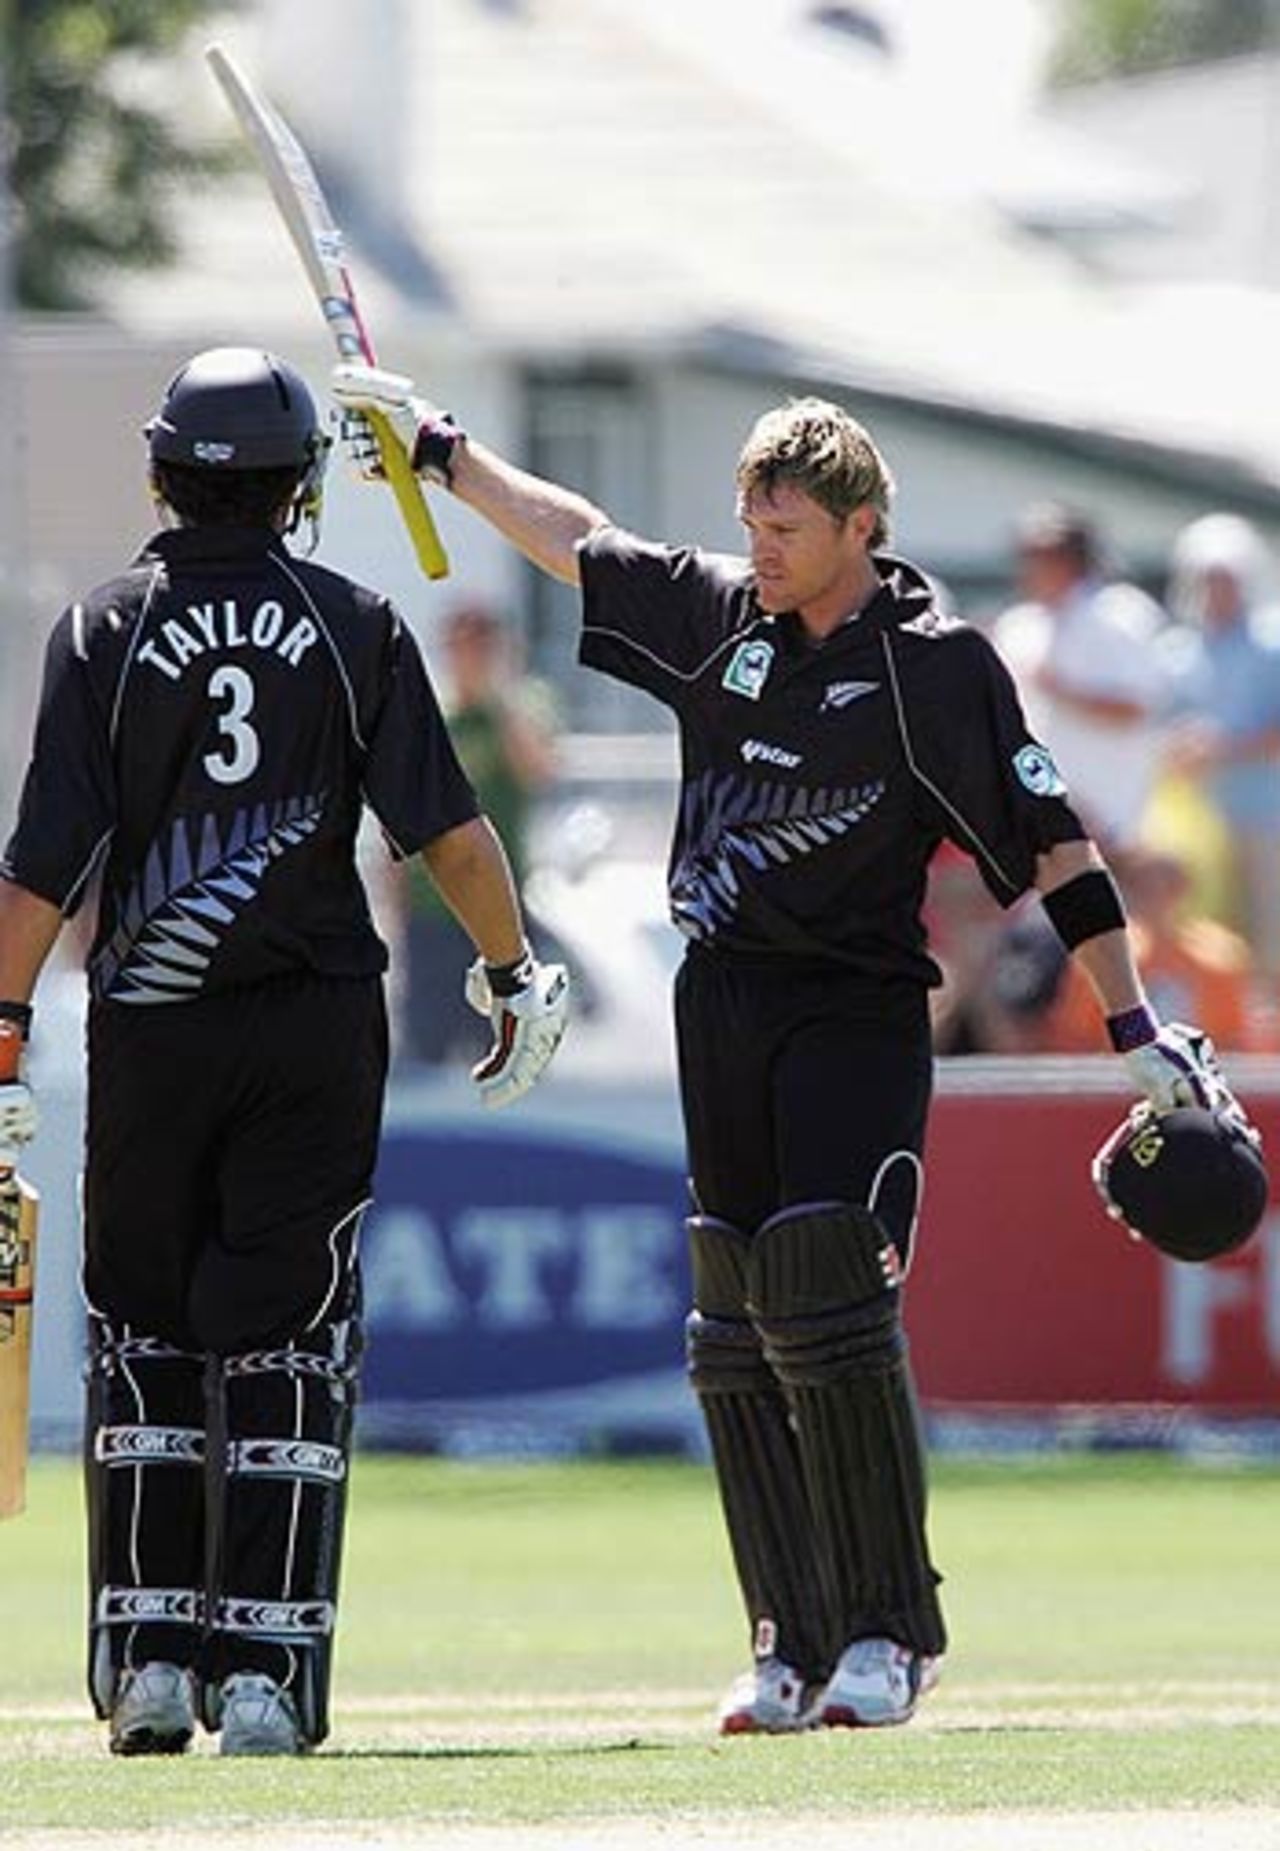 Lou Vincent reaches the three-figure mark, New Zealand v West Indies, 4th ODI, Napier, March 1 2006